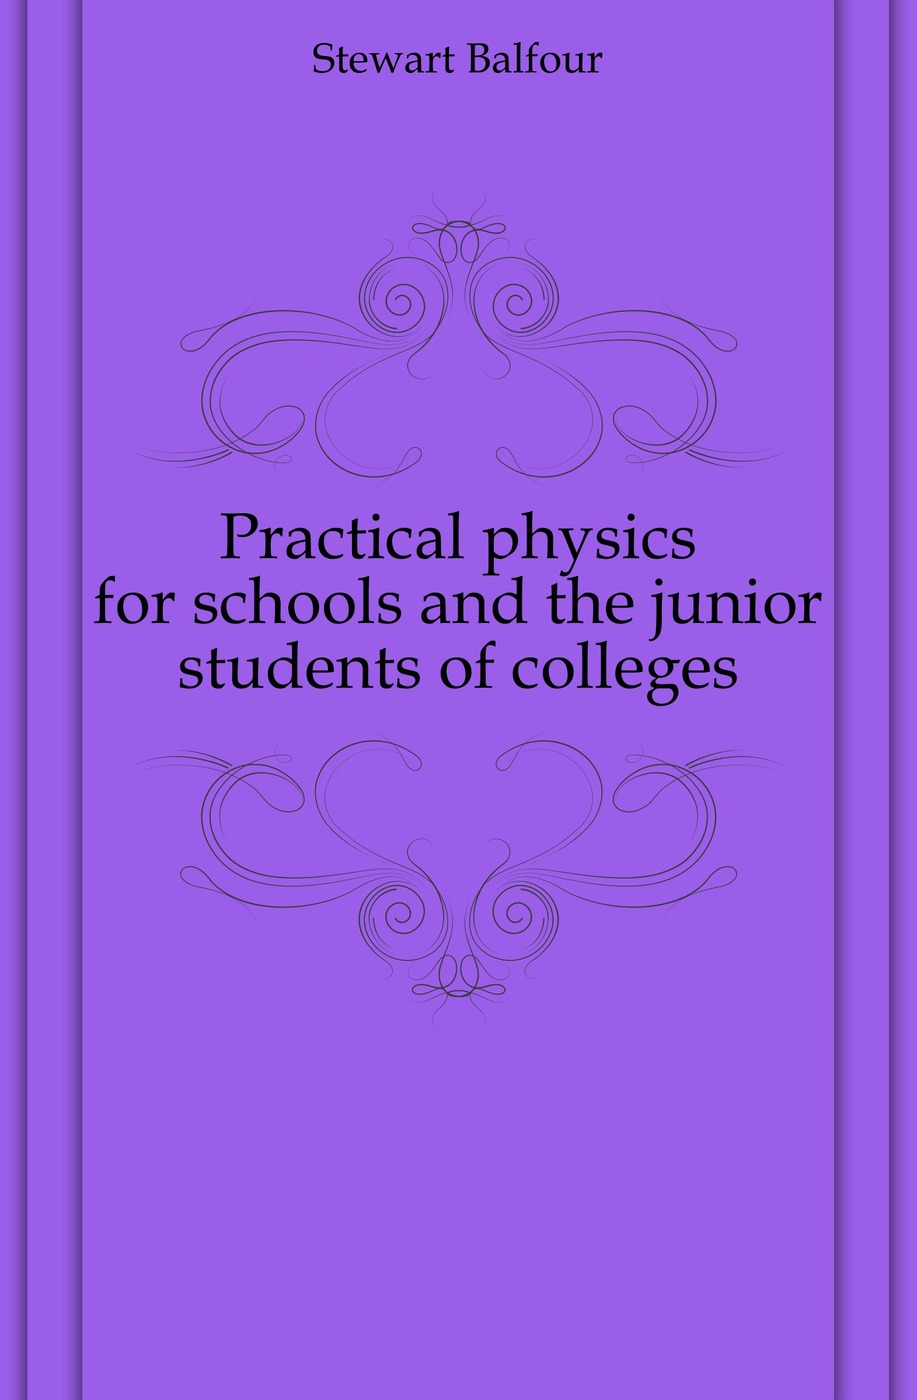 Practical physics for schools and the junior students of colleges